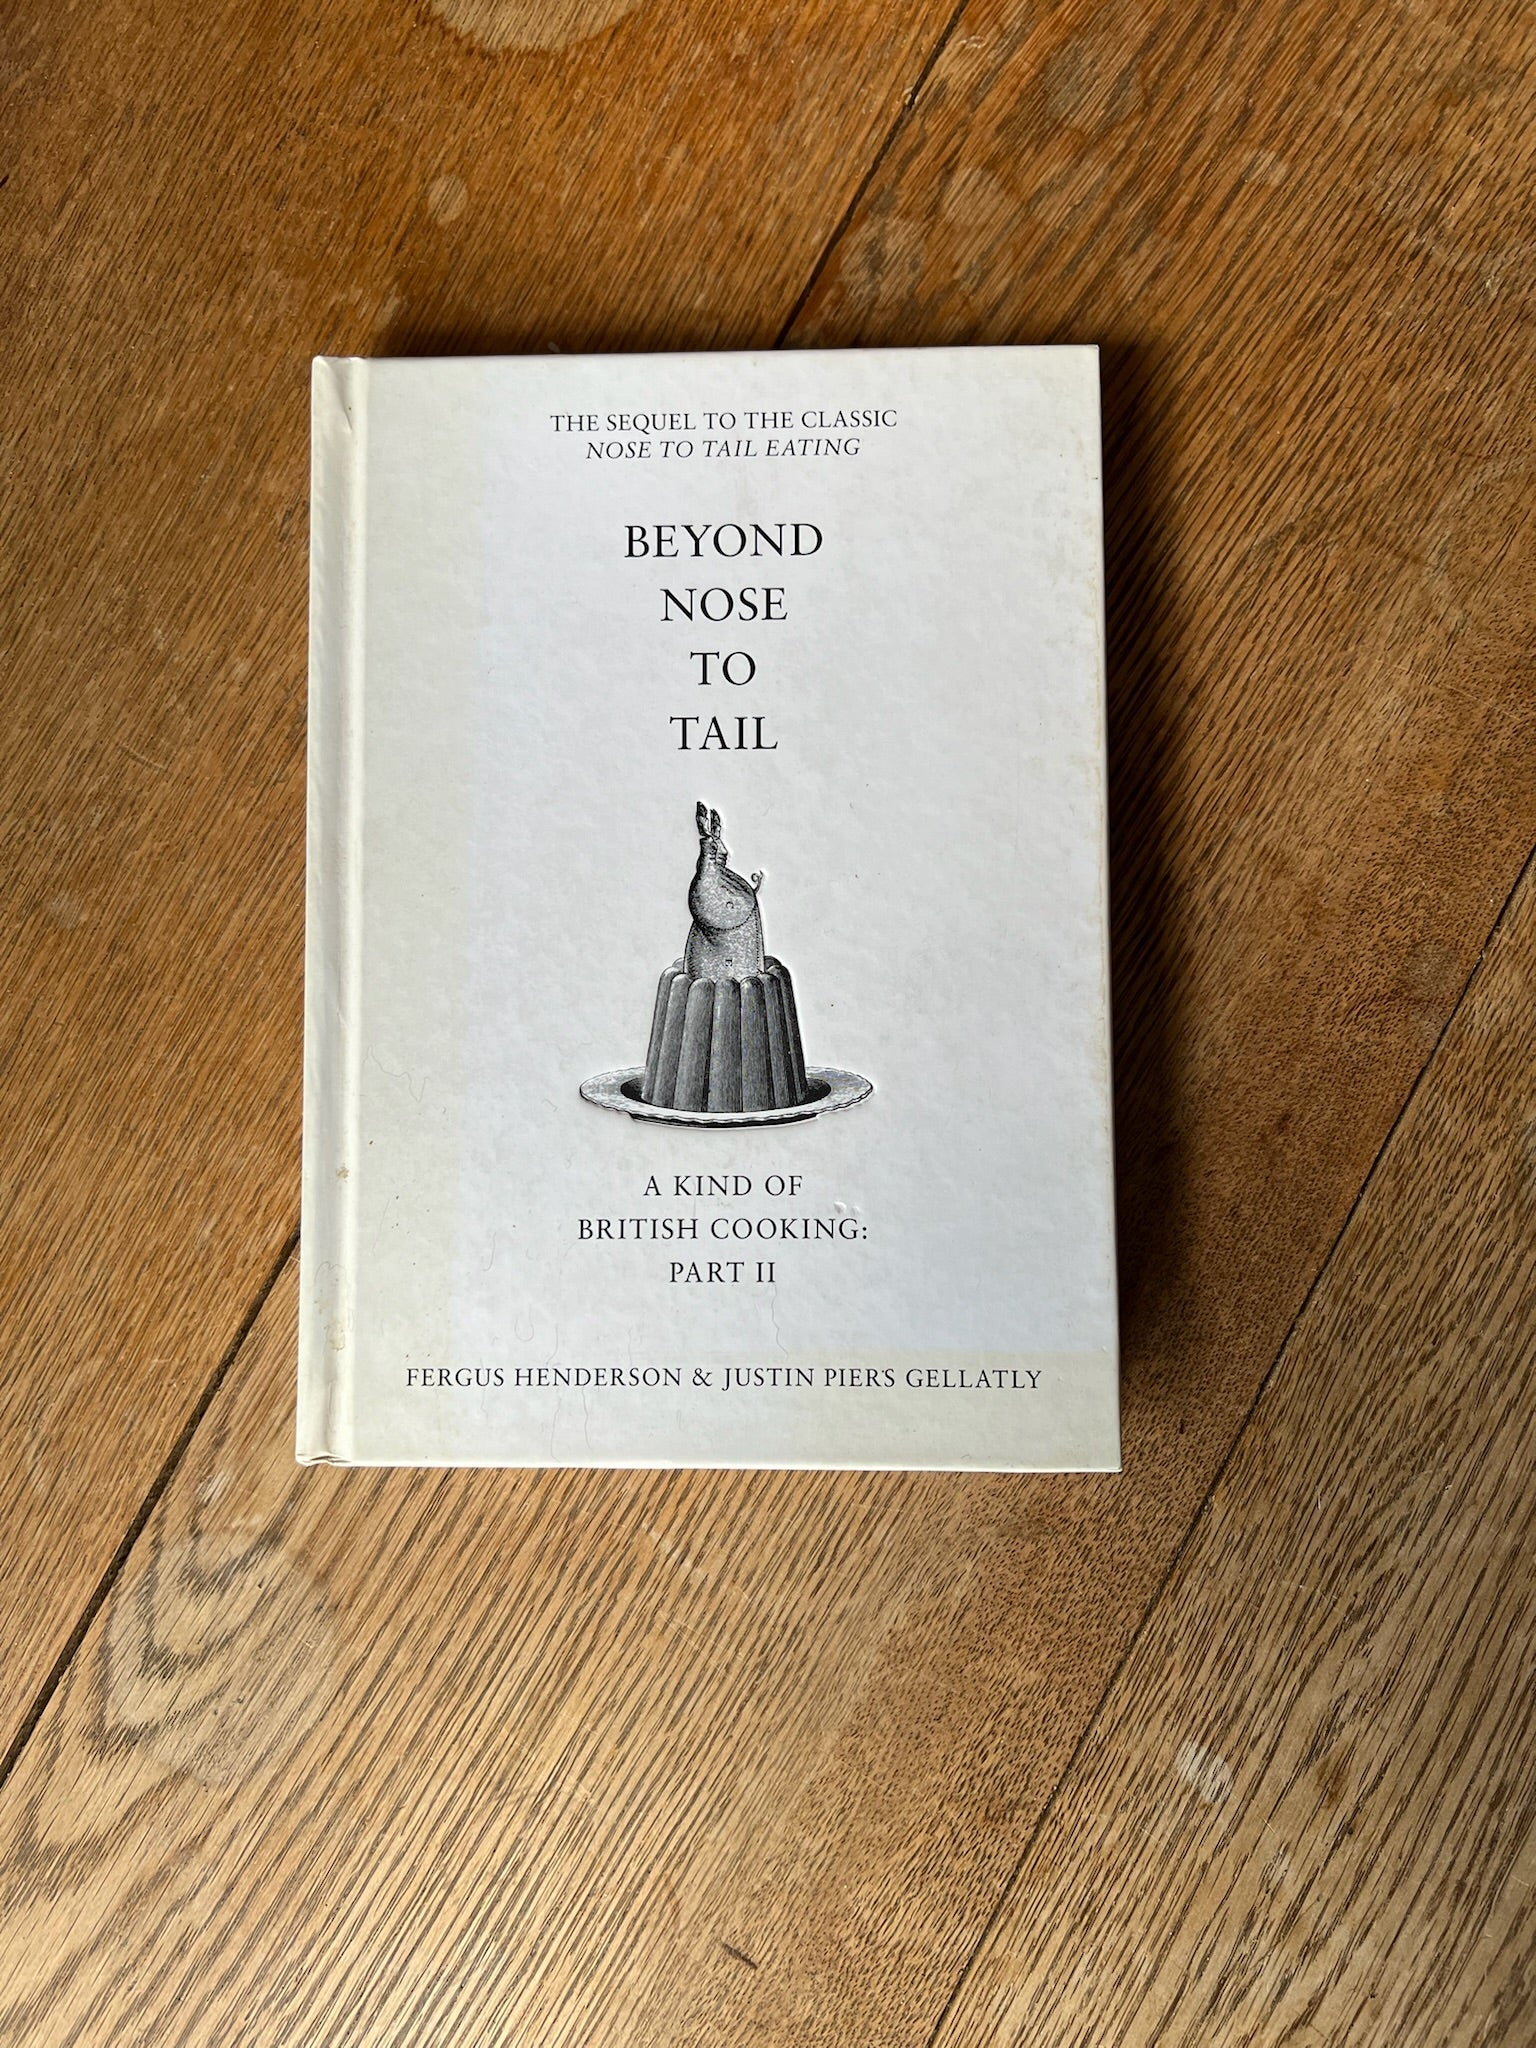 ‘BEYOND NOSE TO TAIL’ A KIND OF BRITISH COOKING PART II - Fergus Henderson & Justin Piers Gellatly